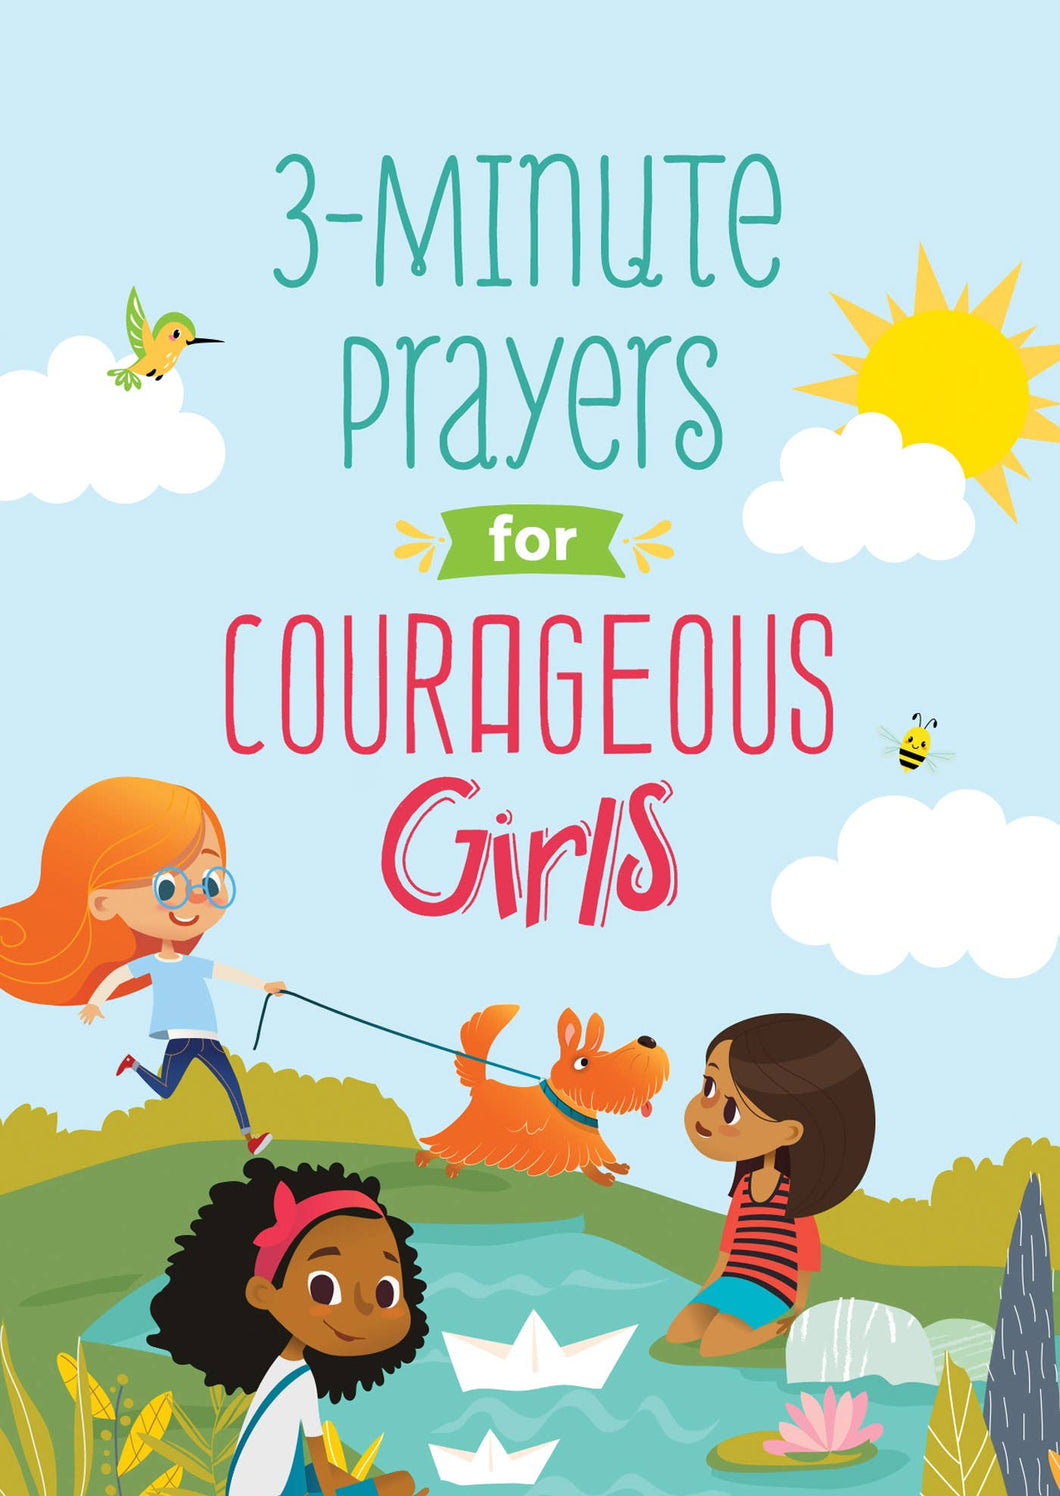 Book: 3-Minute Prayers for Courageous Girls